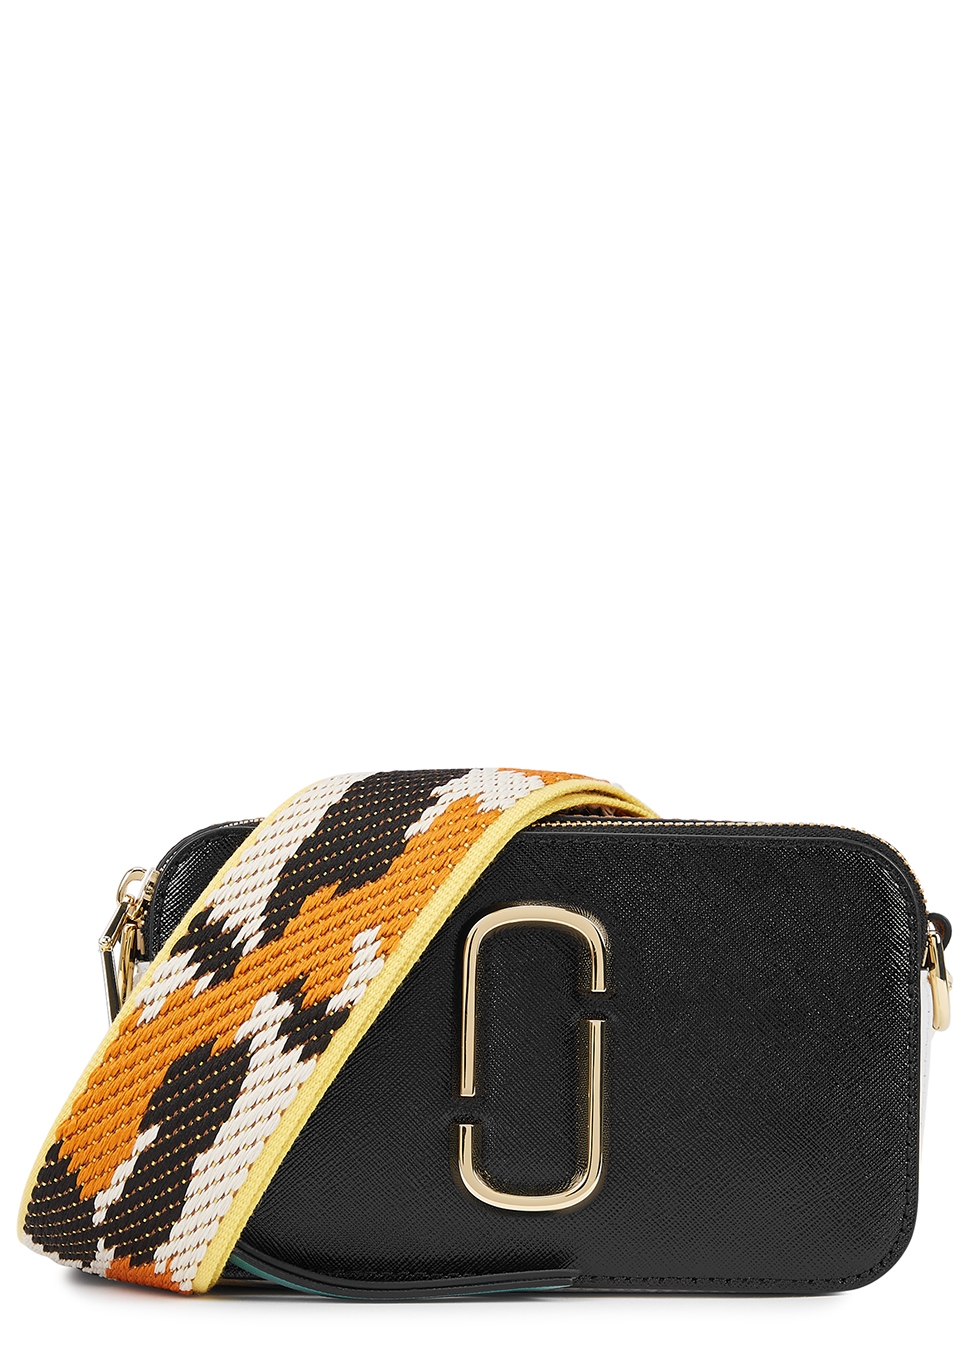 Marc Jacobs The Snapshot panelled leather cross-body bag